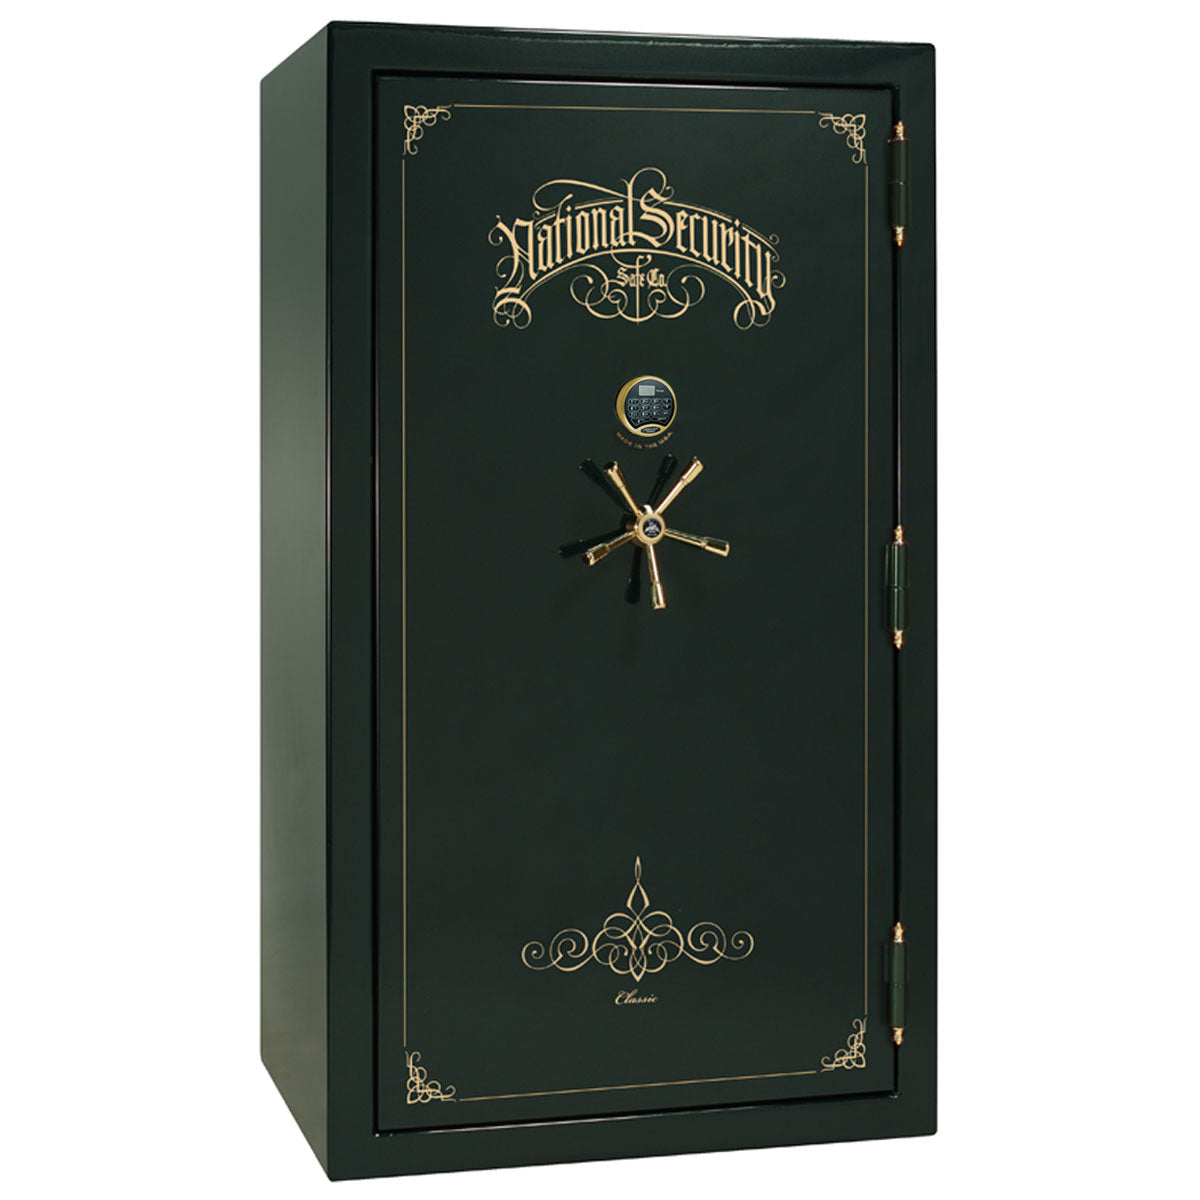 Liberty Safe Classic Plus 40 in Green Gloss with Brass Electronic Lock, closed door.